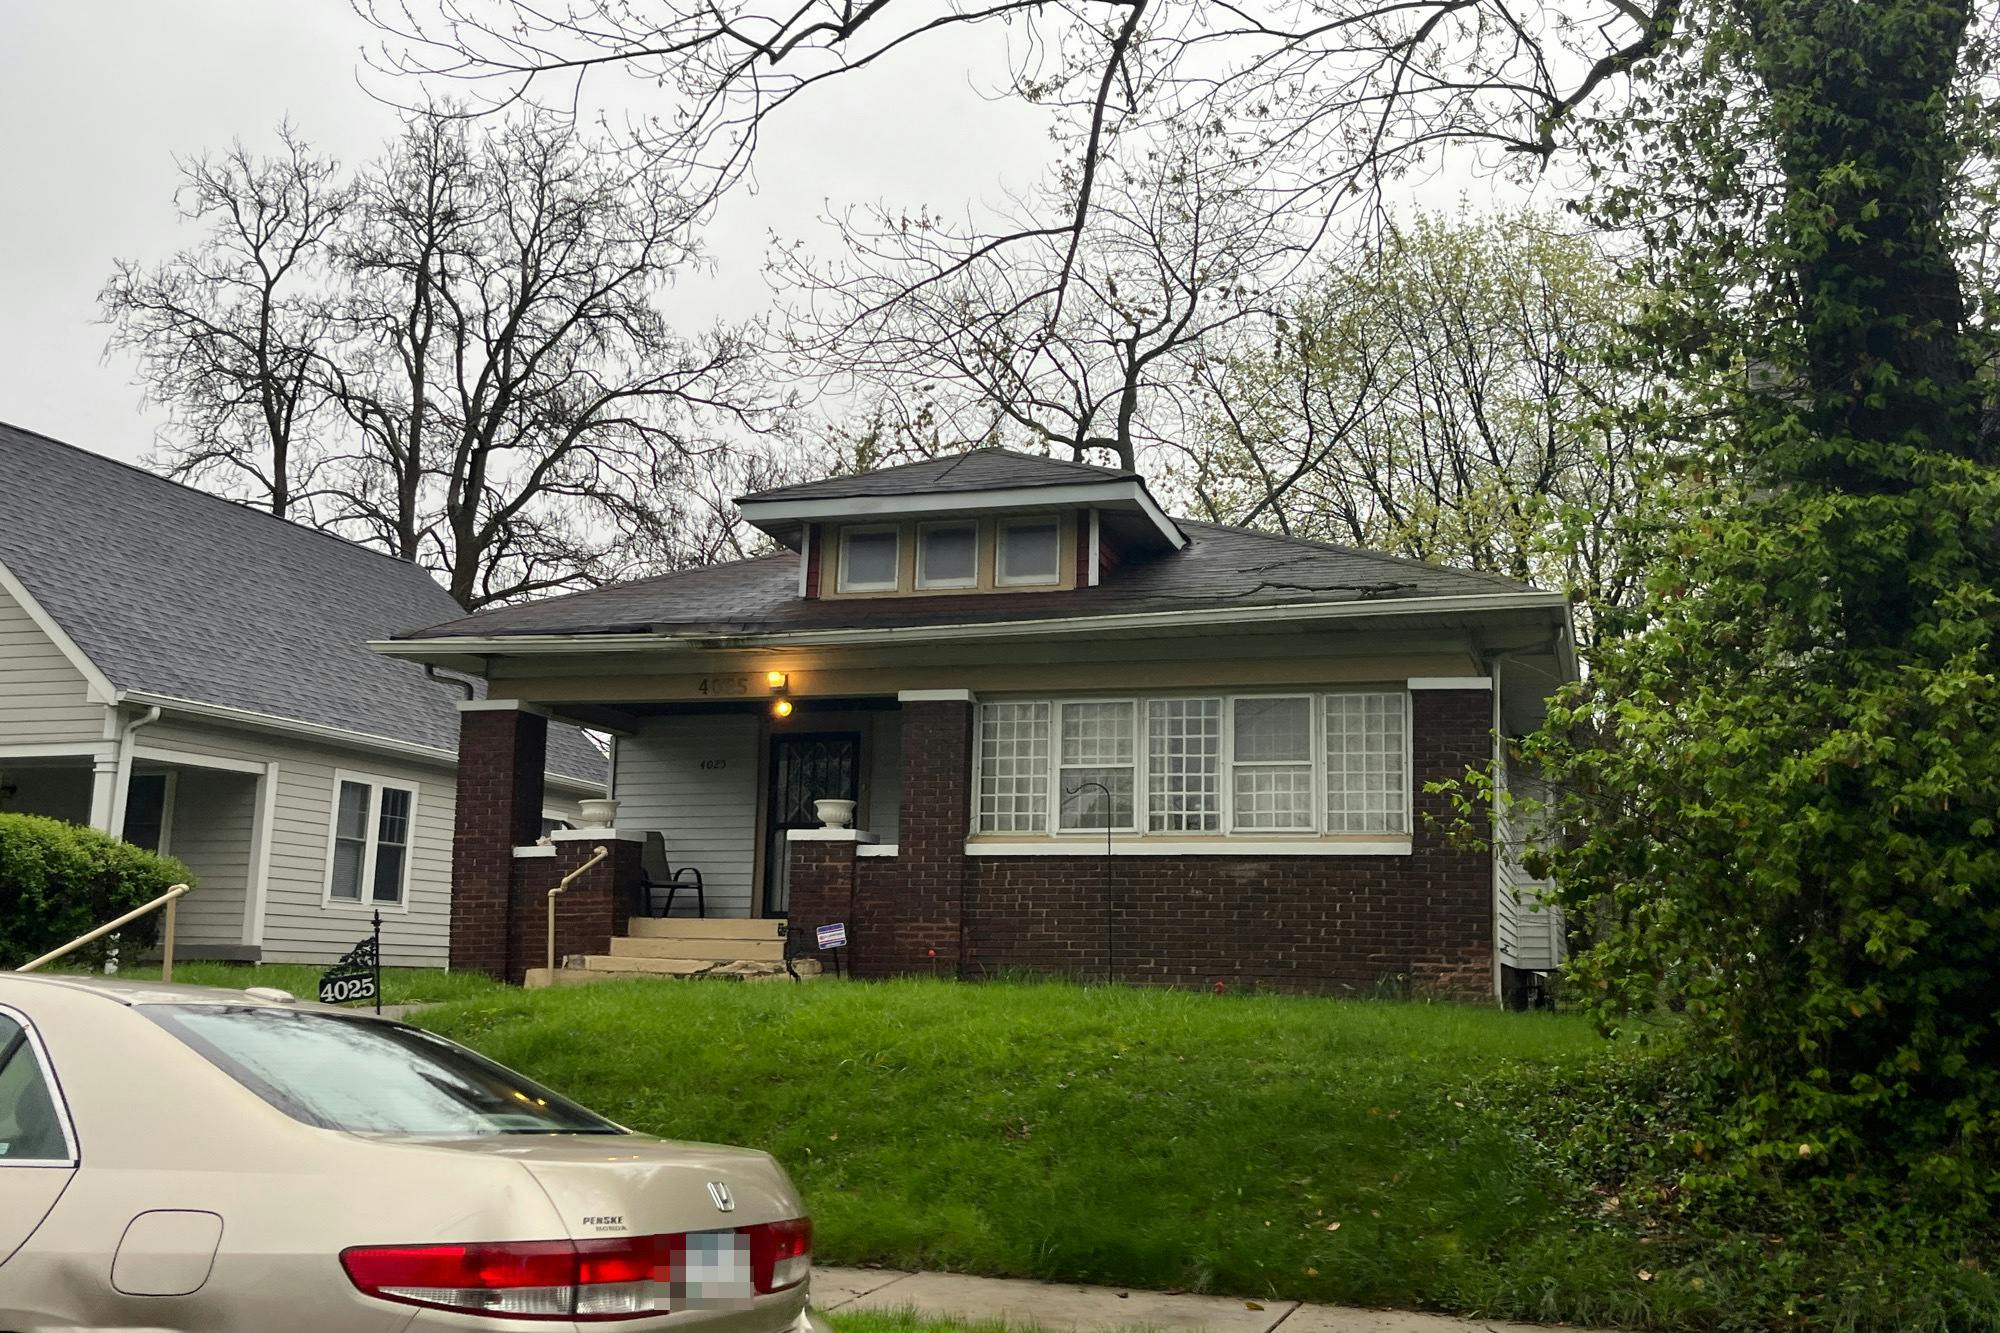 Rookwood Ave, Indianapolis, IN 46208 #1